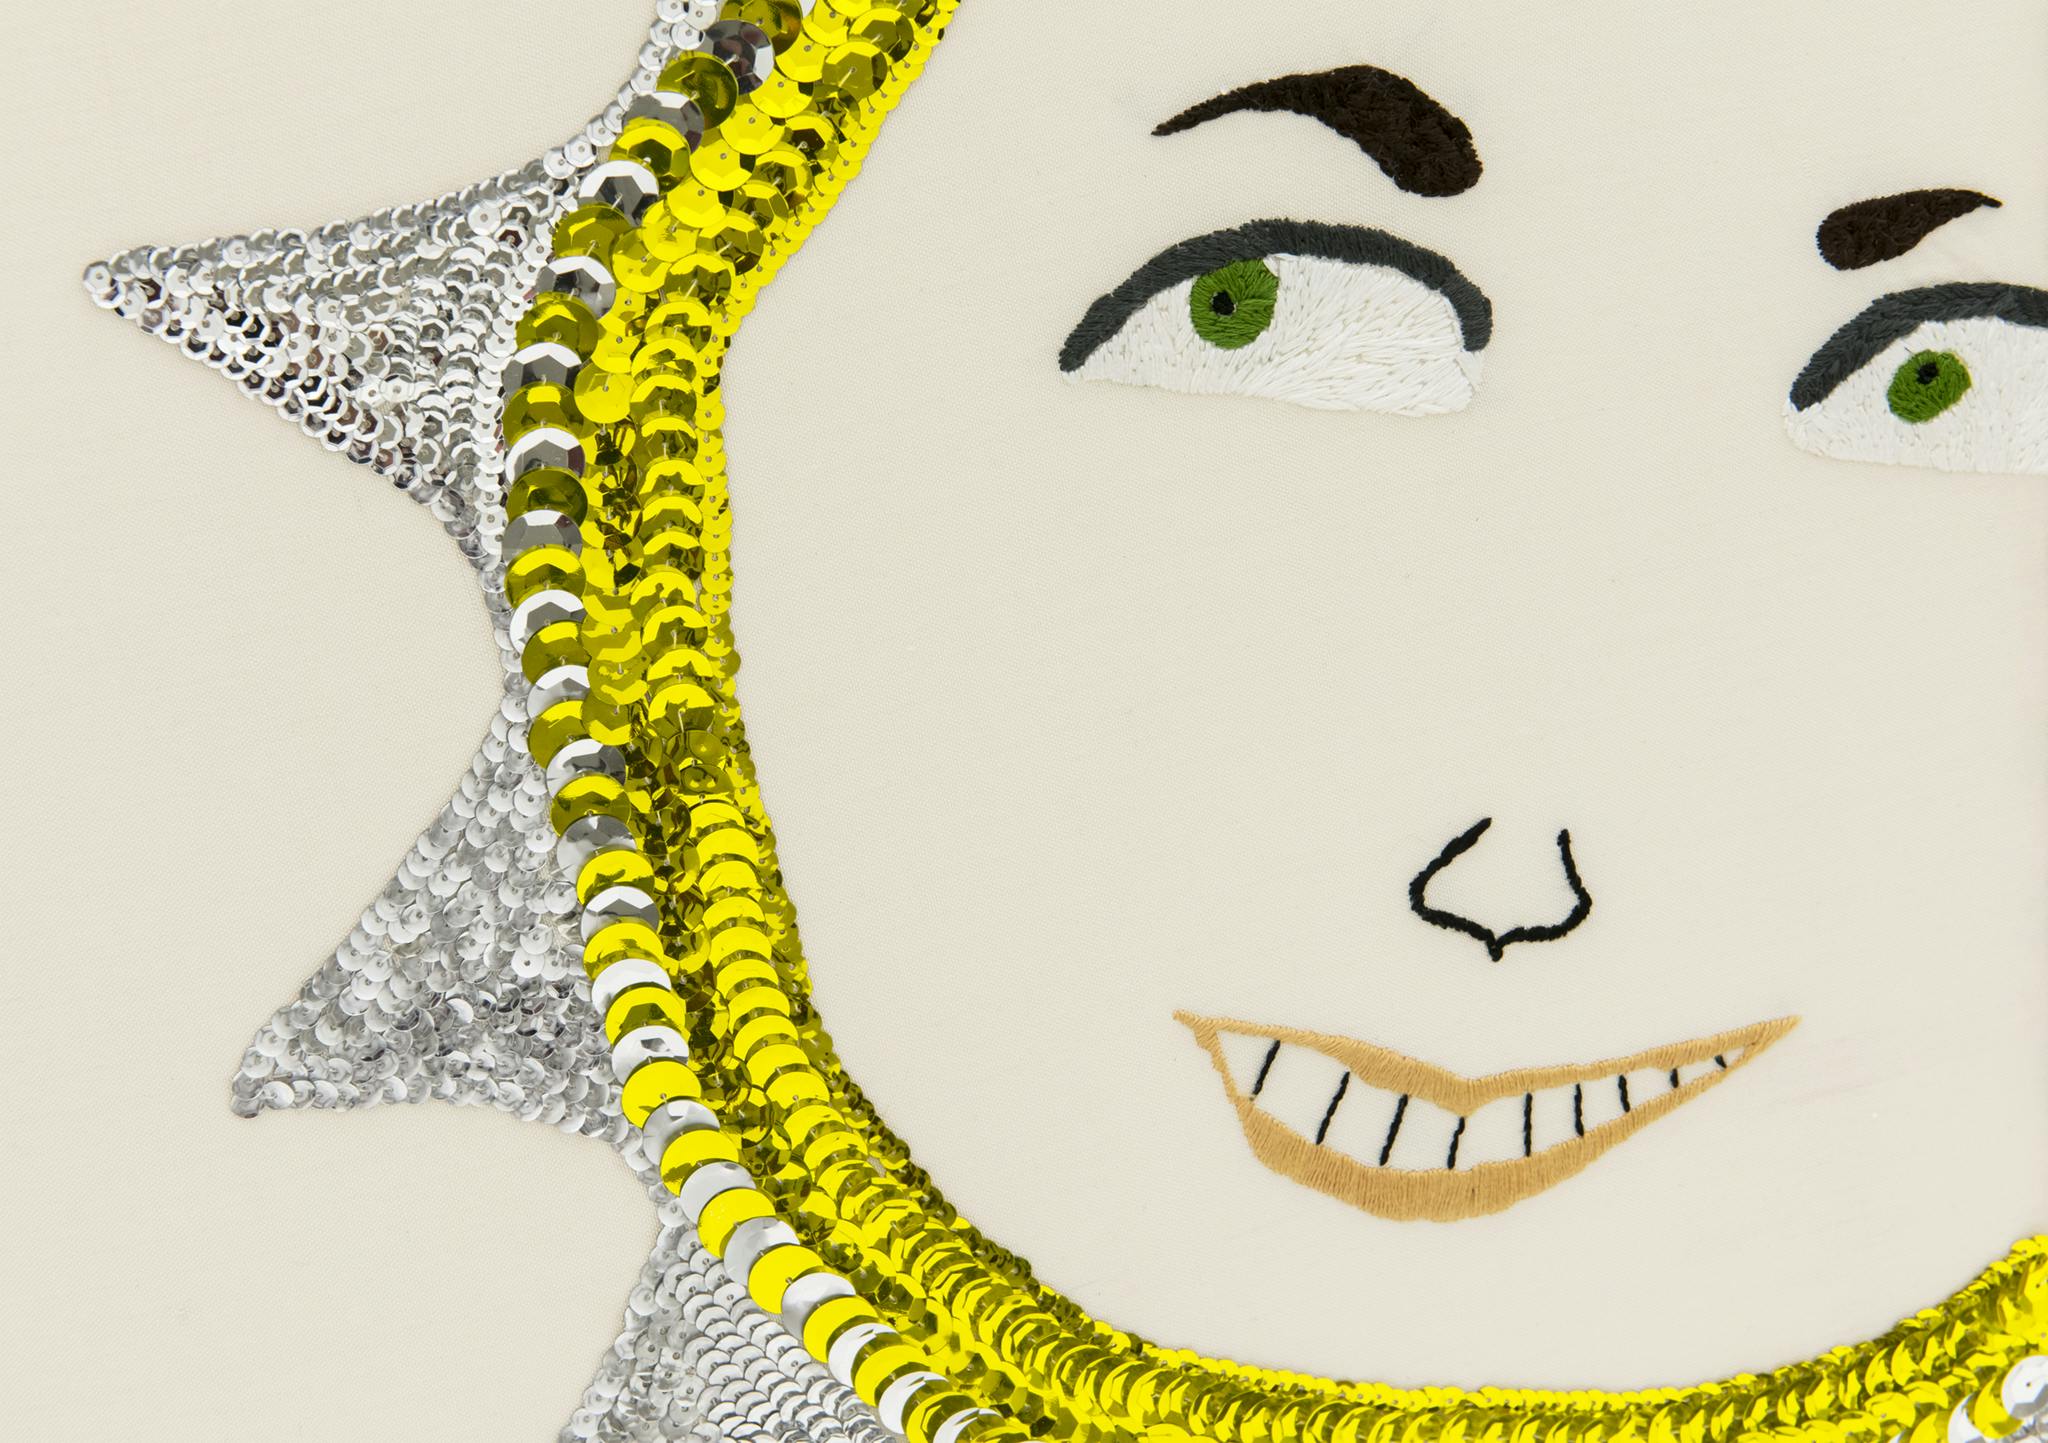 A detail of an embroidery sun with a grinning face.